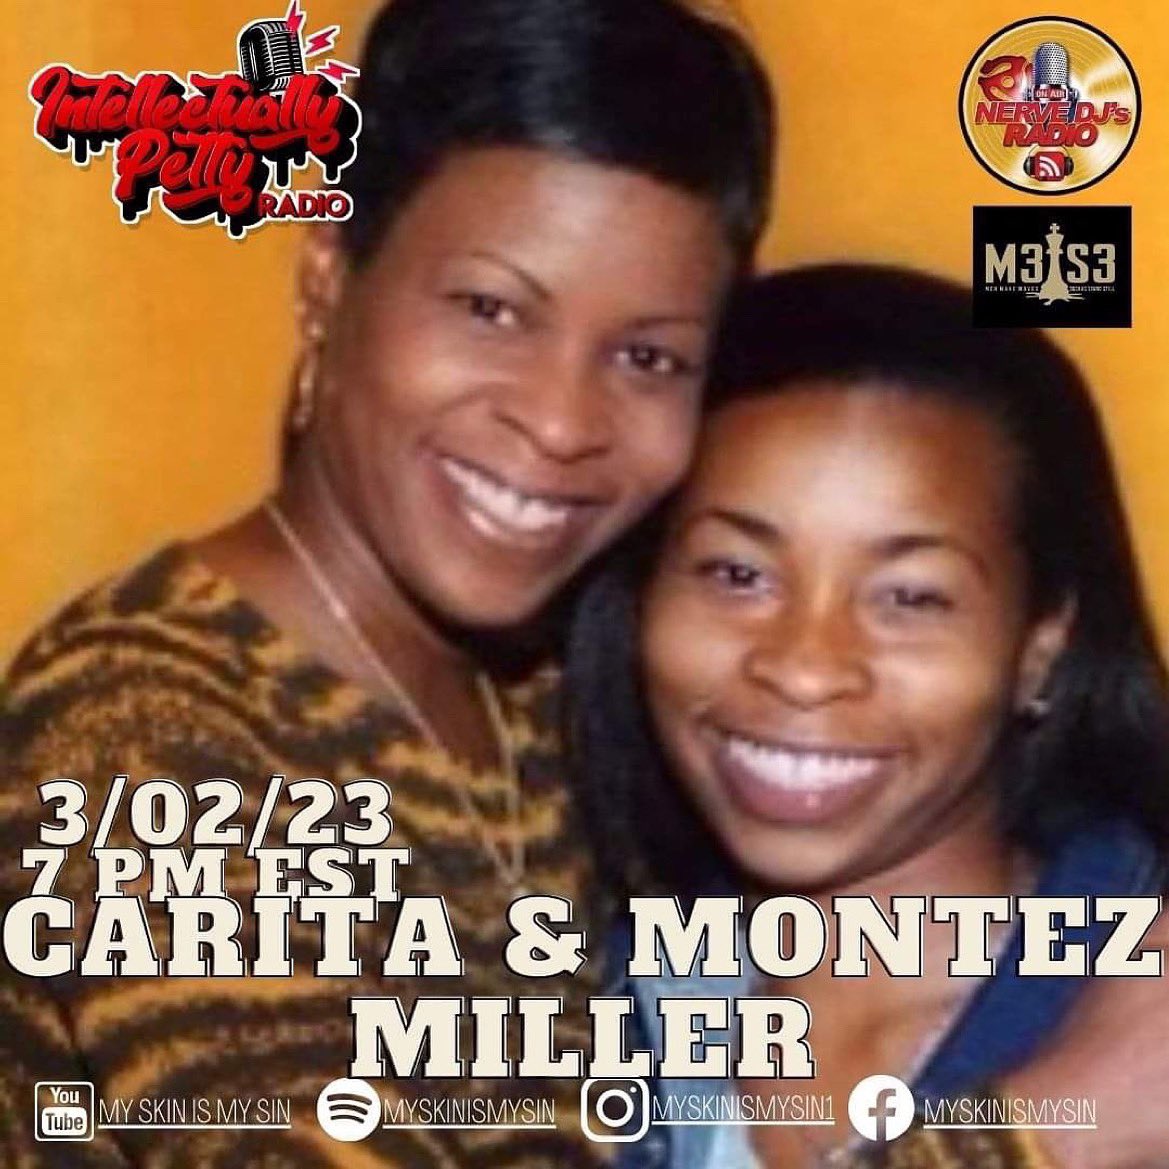 I can’t wait this is going to be epic 🤗🤭🥰💅🏽💃🏽👂🥹
@MySkinIsMySin1 
The first family of management @caritamontezmiller @MontezMiller will be joining the conversation NEXT Thursday at 7pm EST #ladywiththegoldenear #management #legend #detroit #nervedjs #intellectuallypettyradio